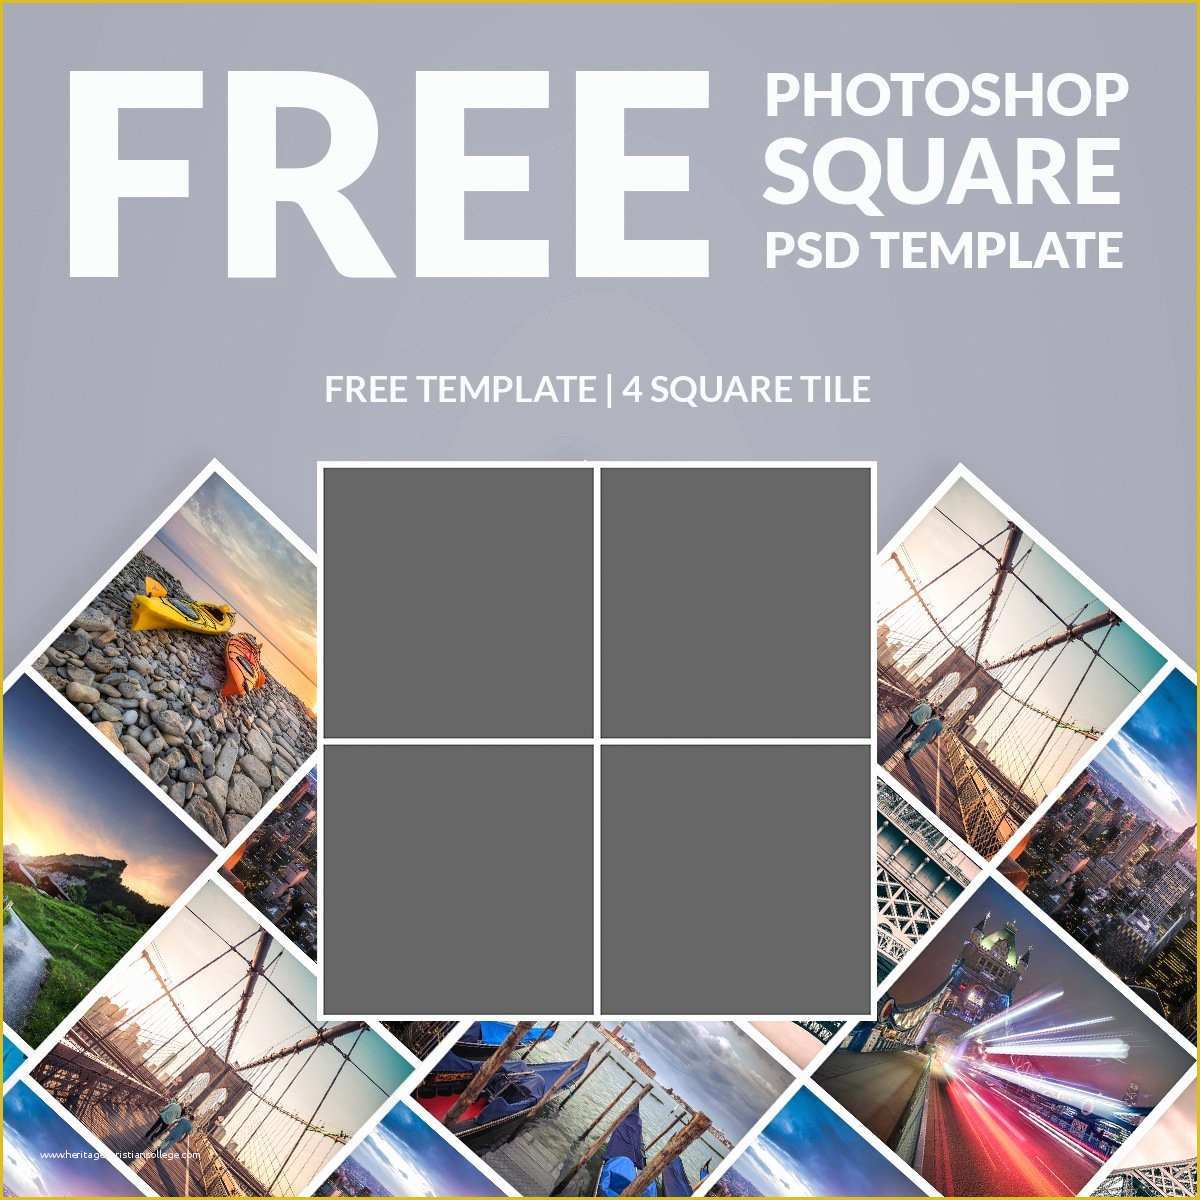 Free Photoshop Flyer Templates Of Free Shop Template Collage Square Download now